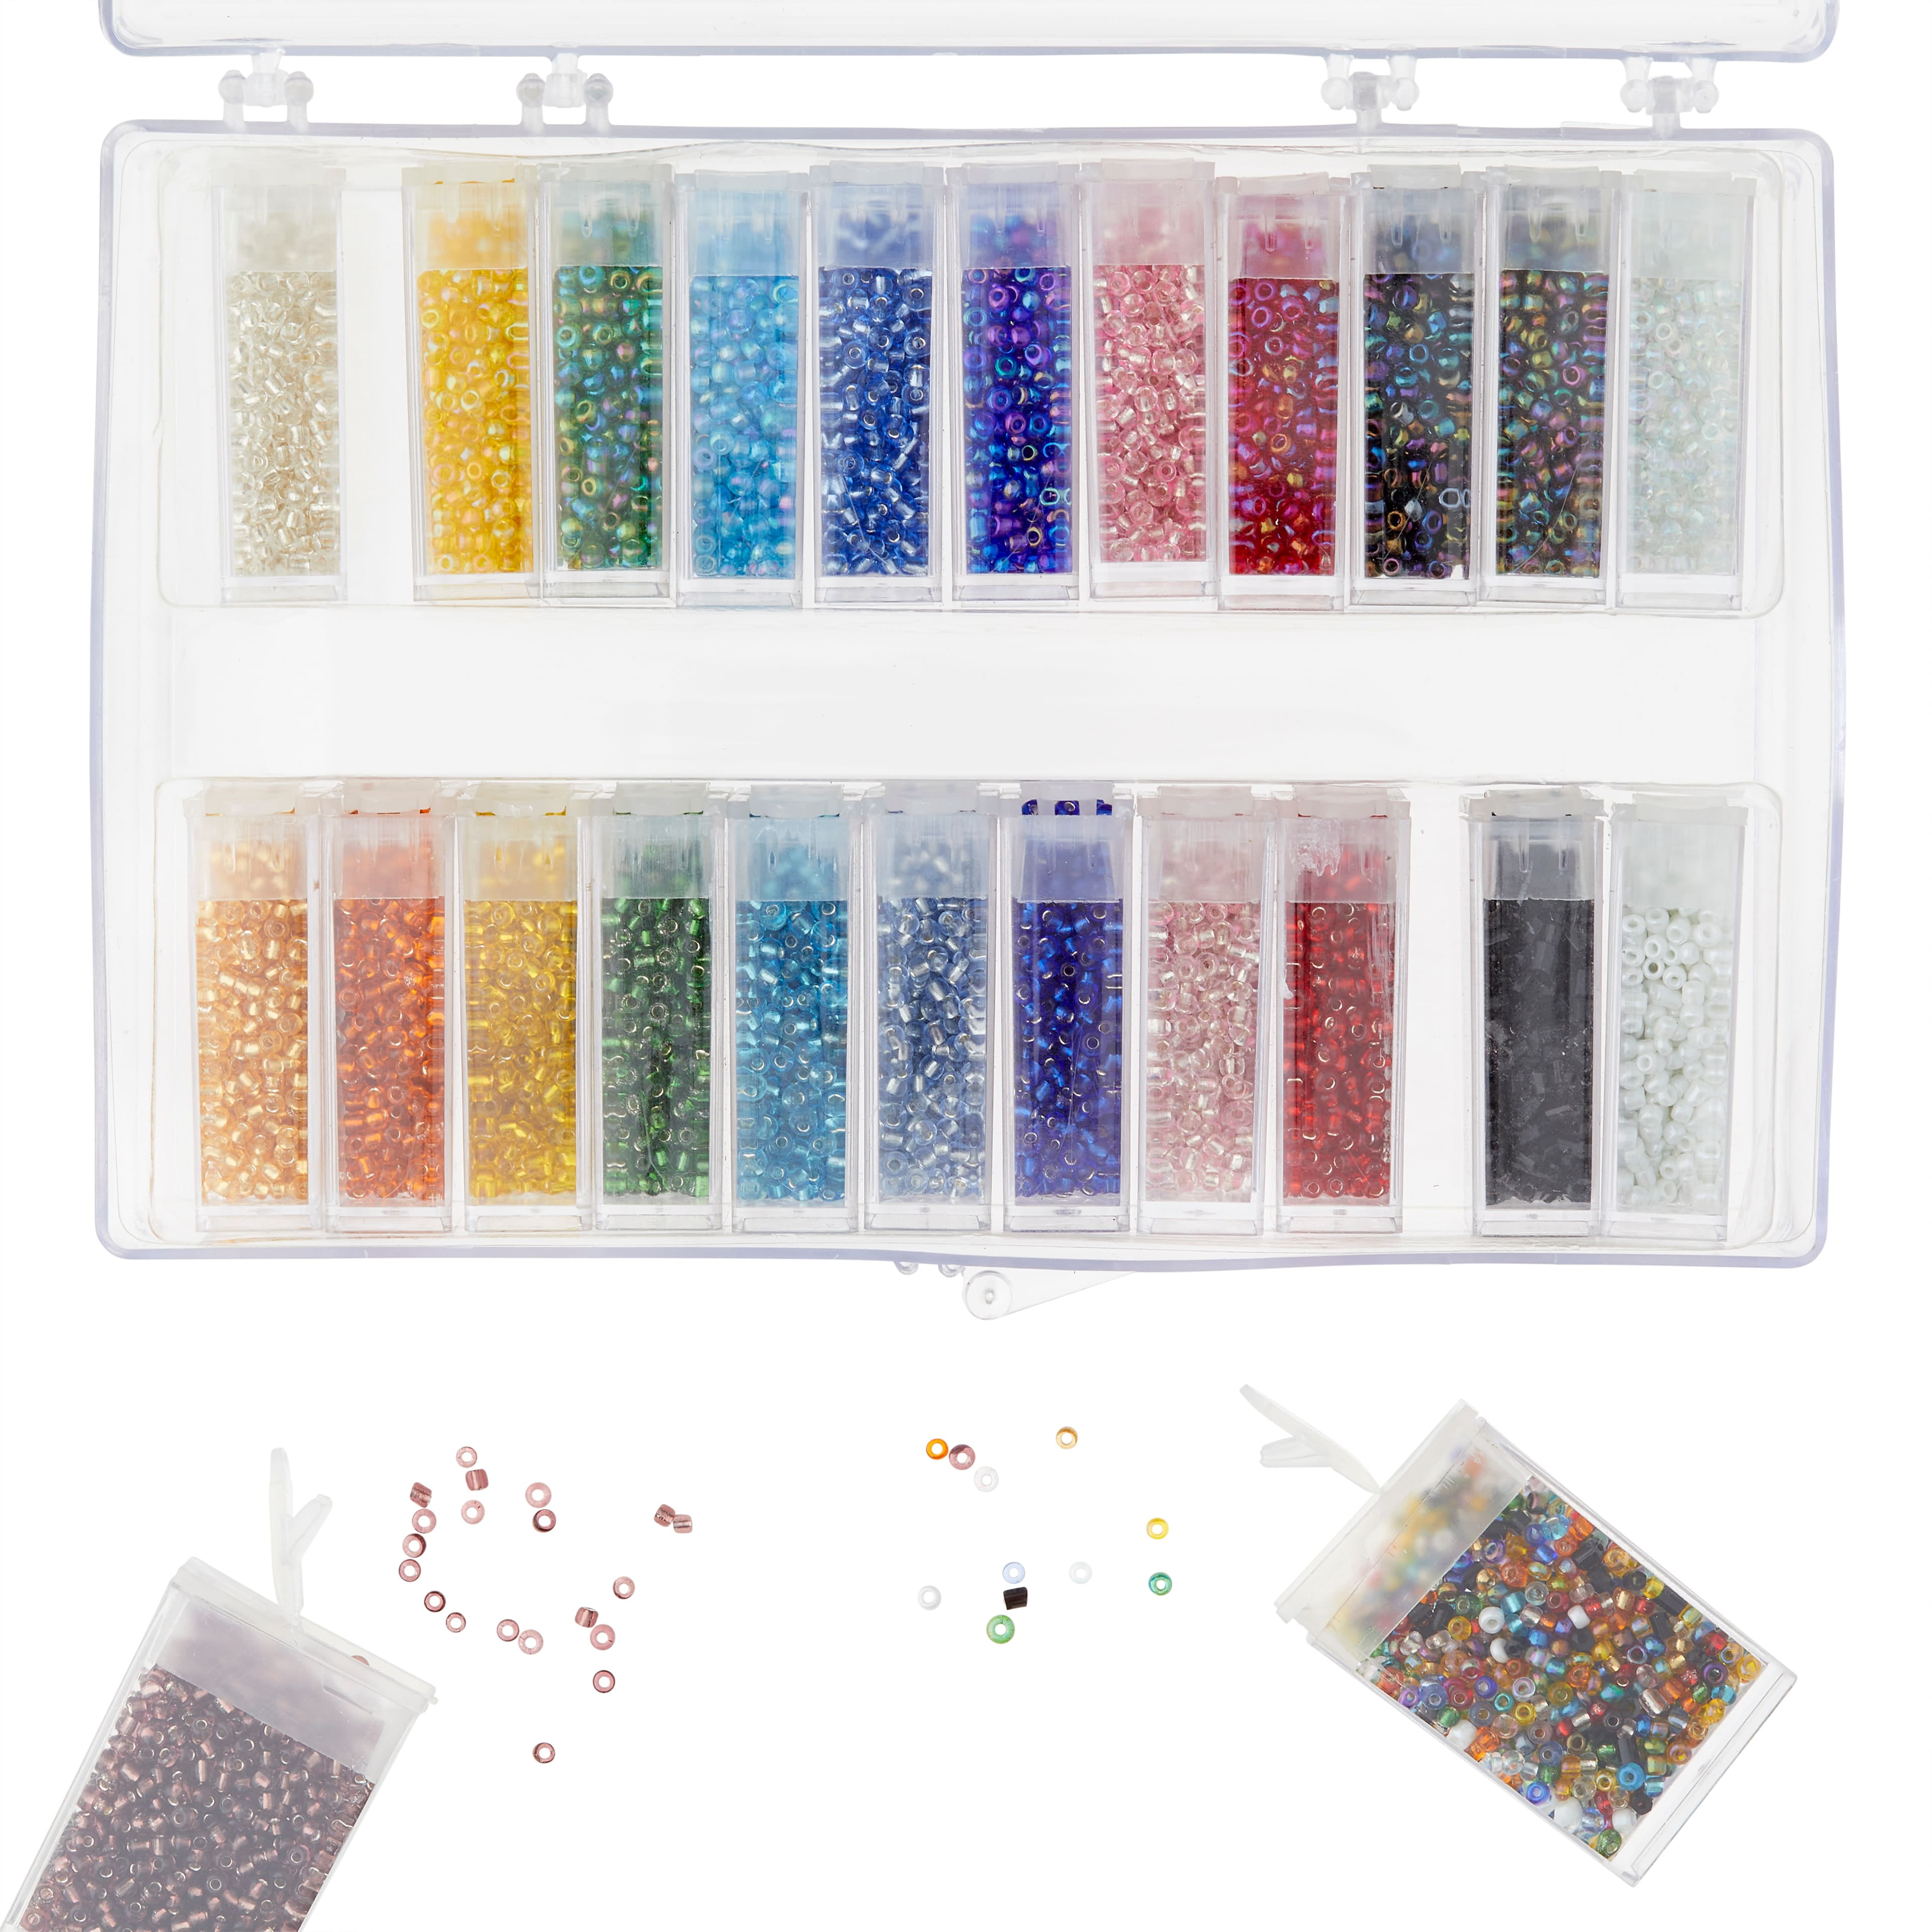 6 Pack: Bead Storage Box with Adjustable Compartments by Bead Landing™